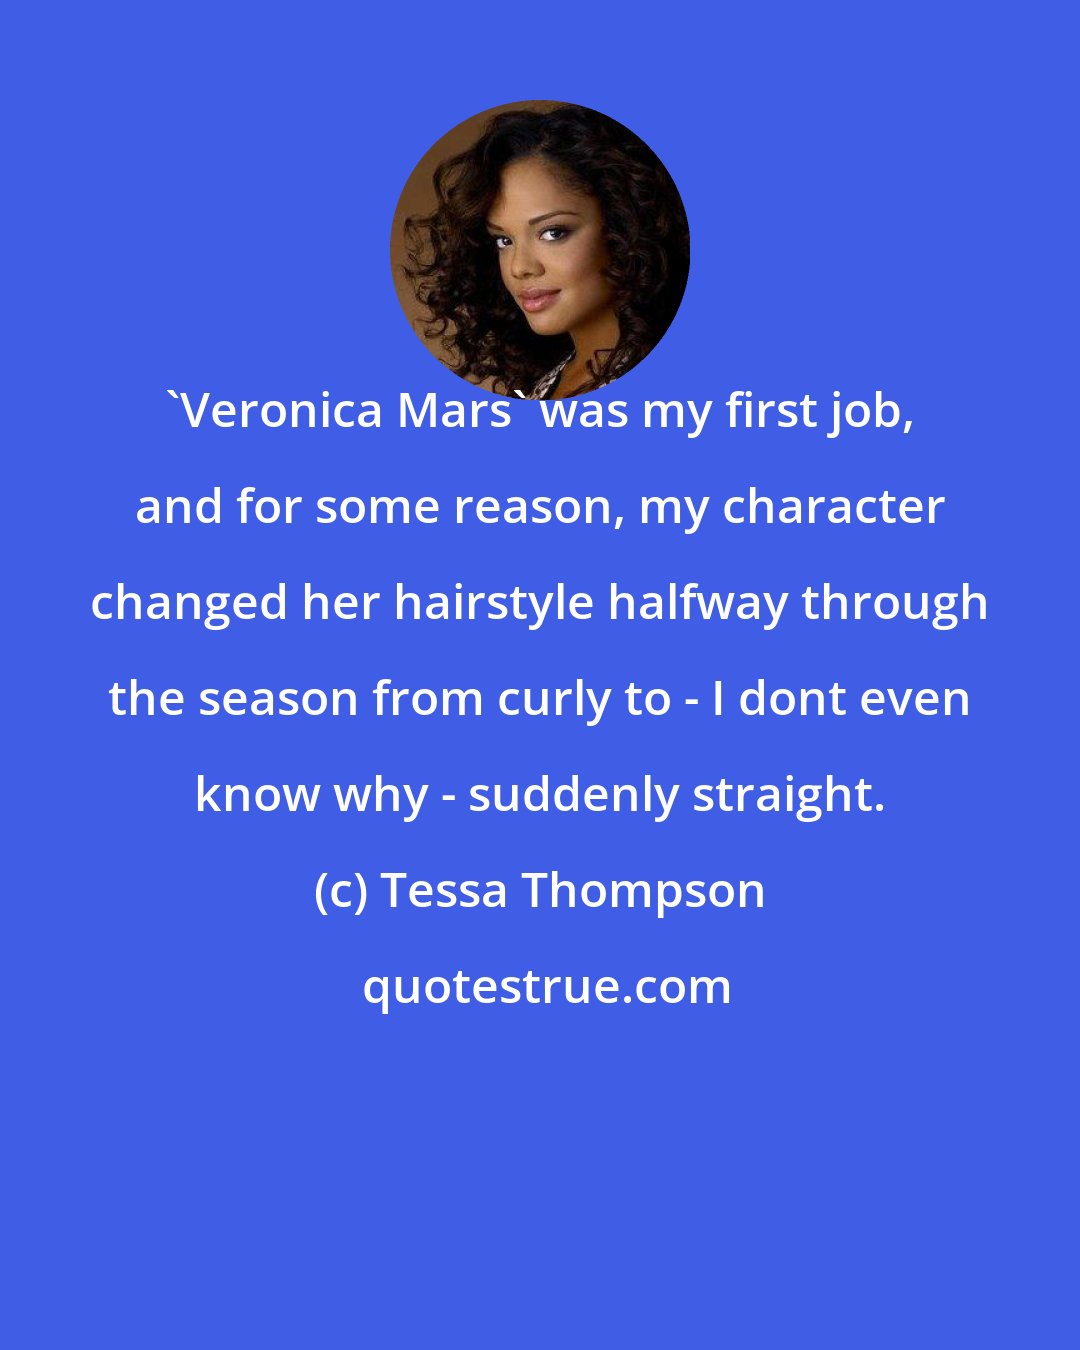 Tessa Thompson: 'Veronica Mars' was my first job, and for some reason, my character changed her hairstyle halfway through the season from curly to - I dont even know why - suddenly straight.